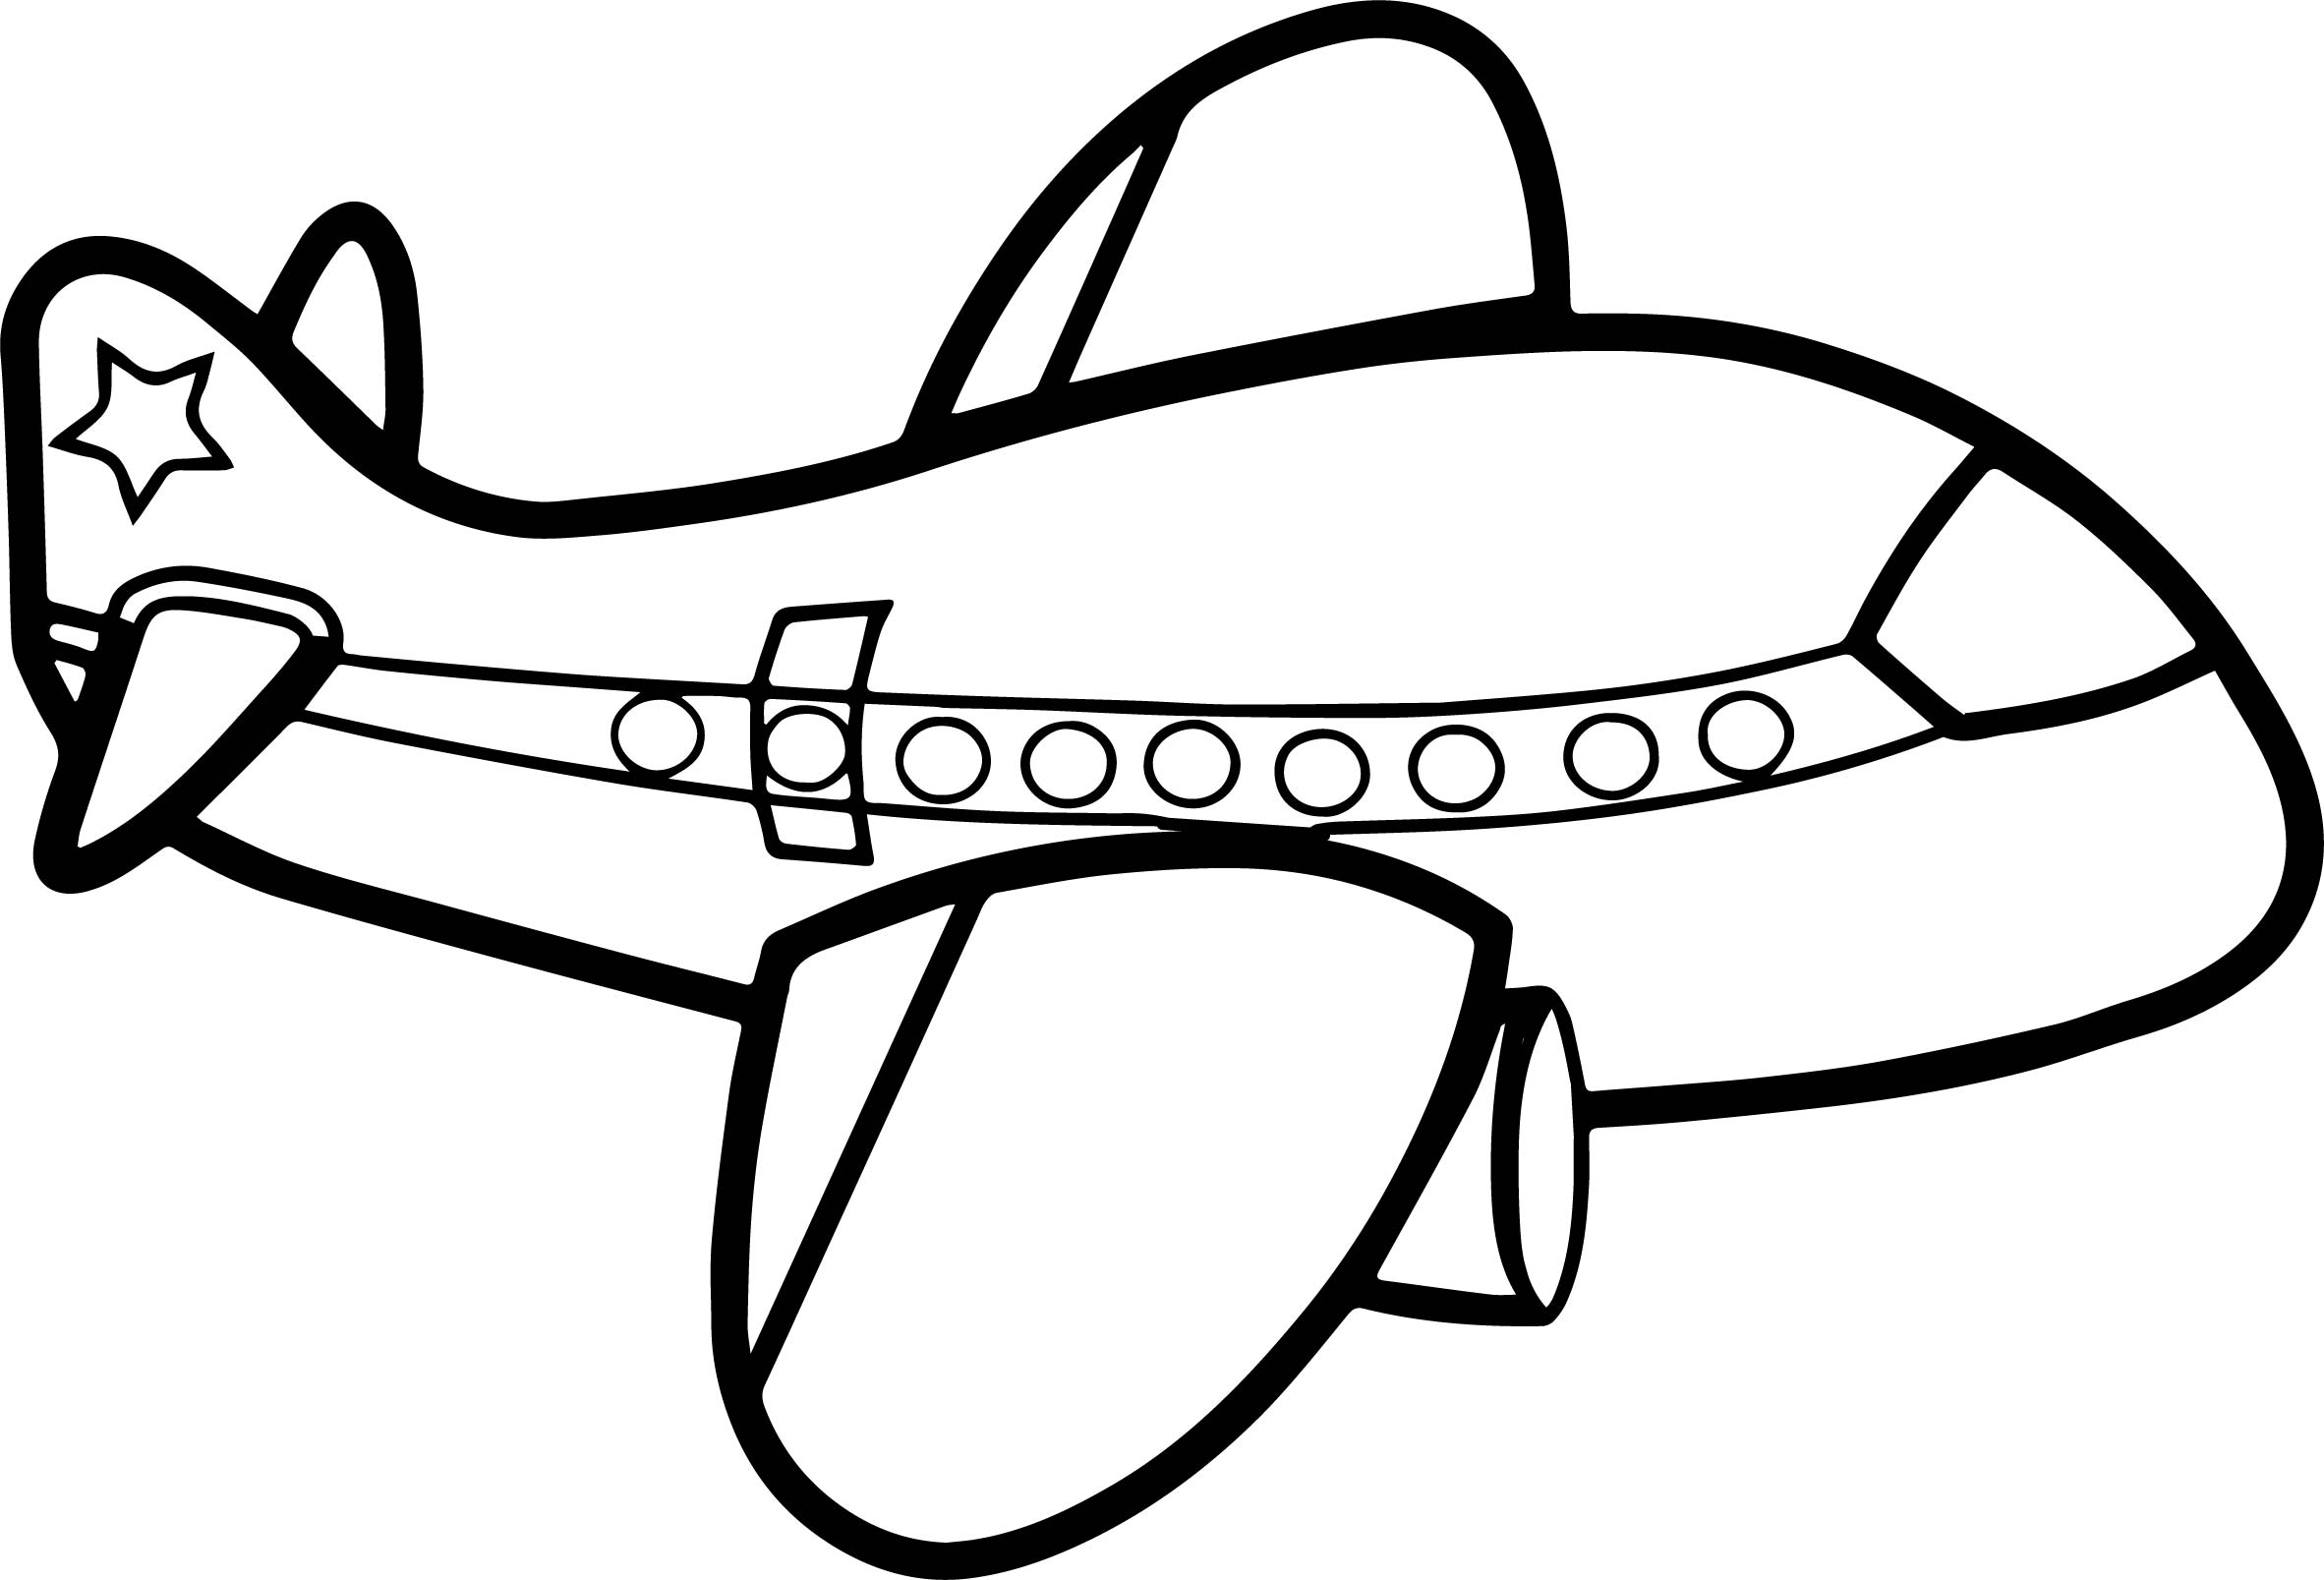 Fighter Jet Coloring Pages at GetColorings.com | Free printable ...